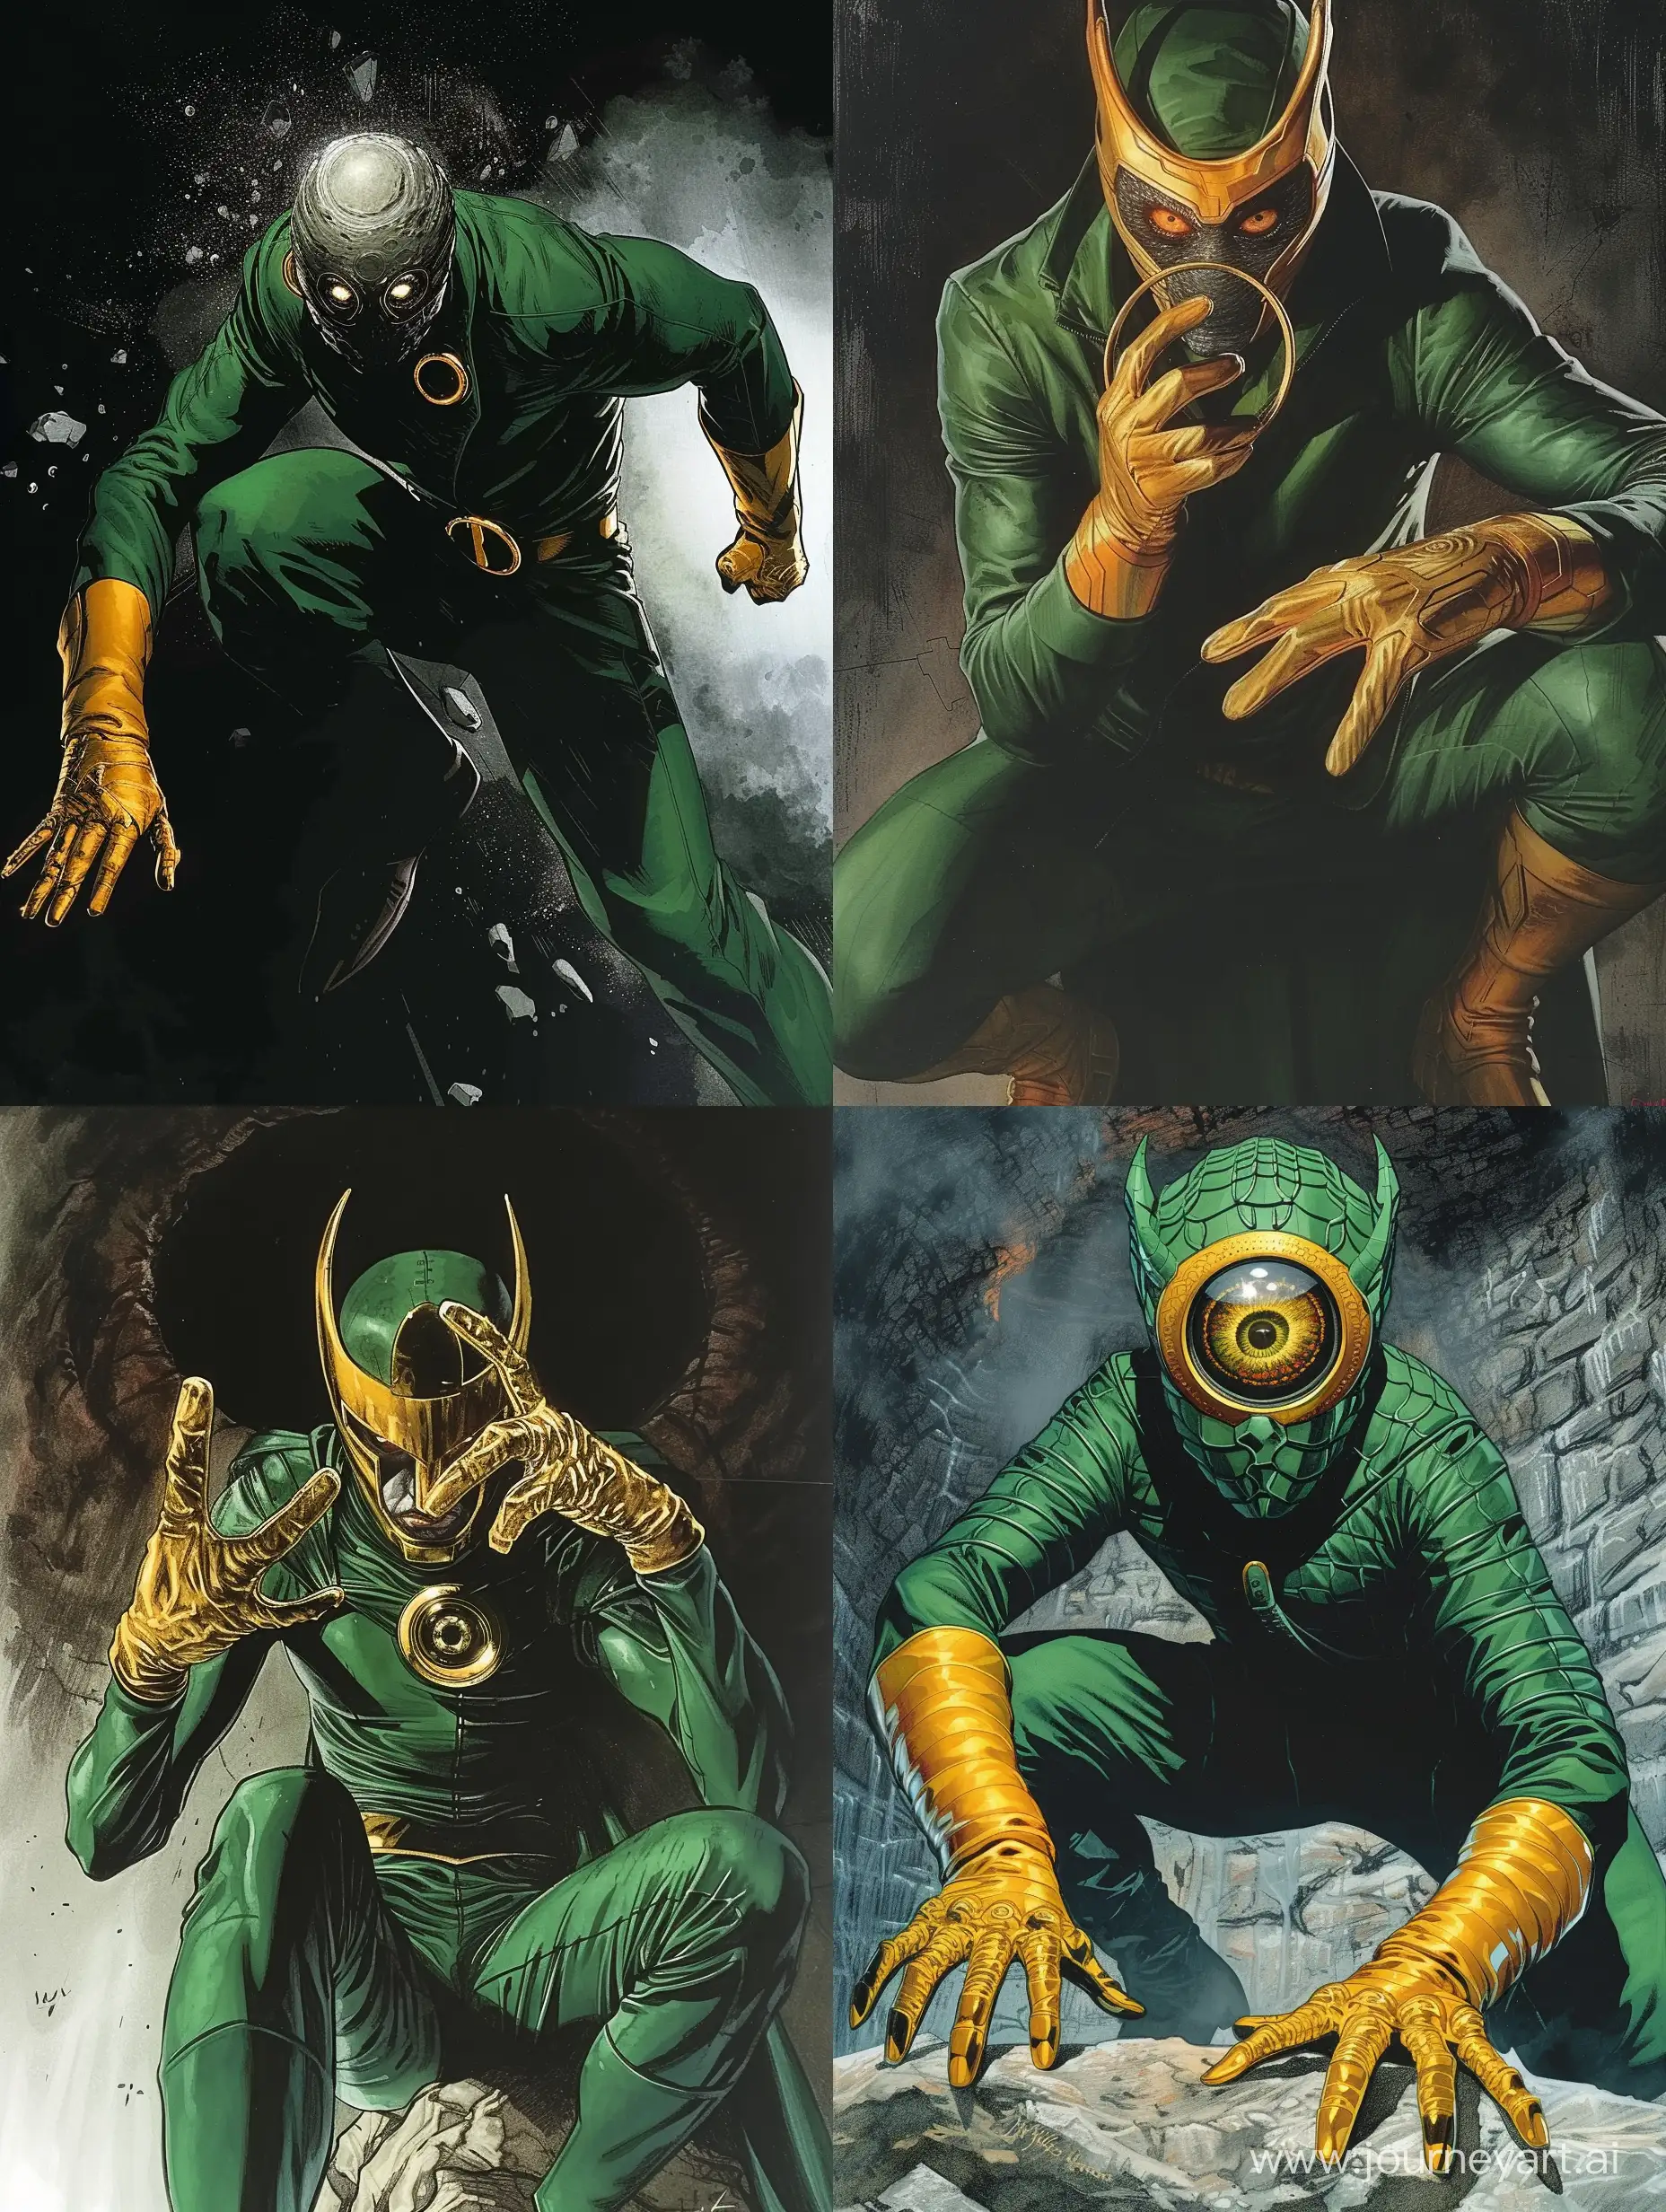 Cover of comics book, action pose, dark lord, green suit, gold gloves, ring form head, sauron eye, marvel comics style